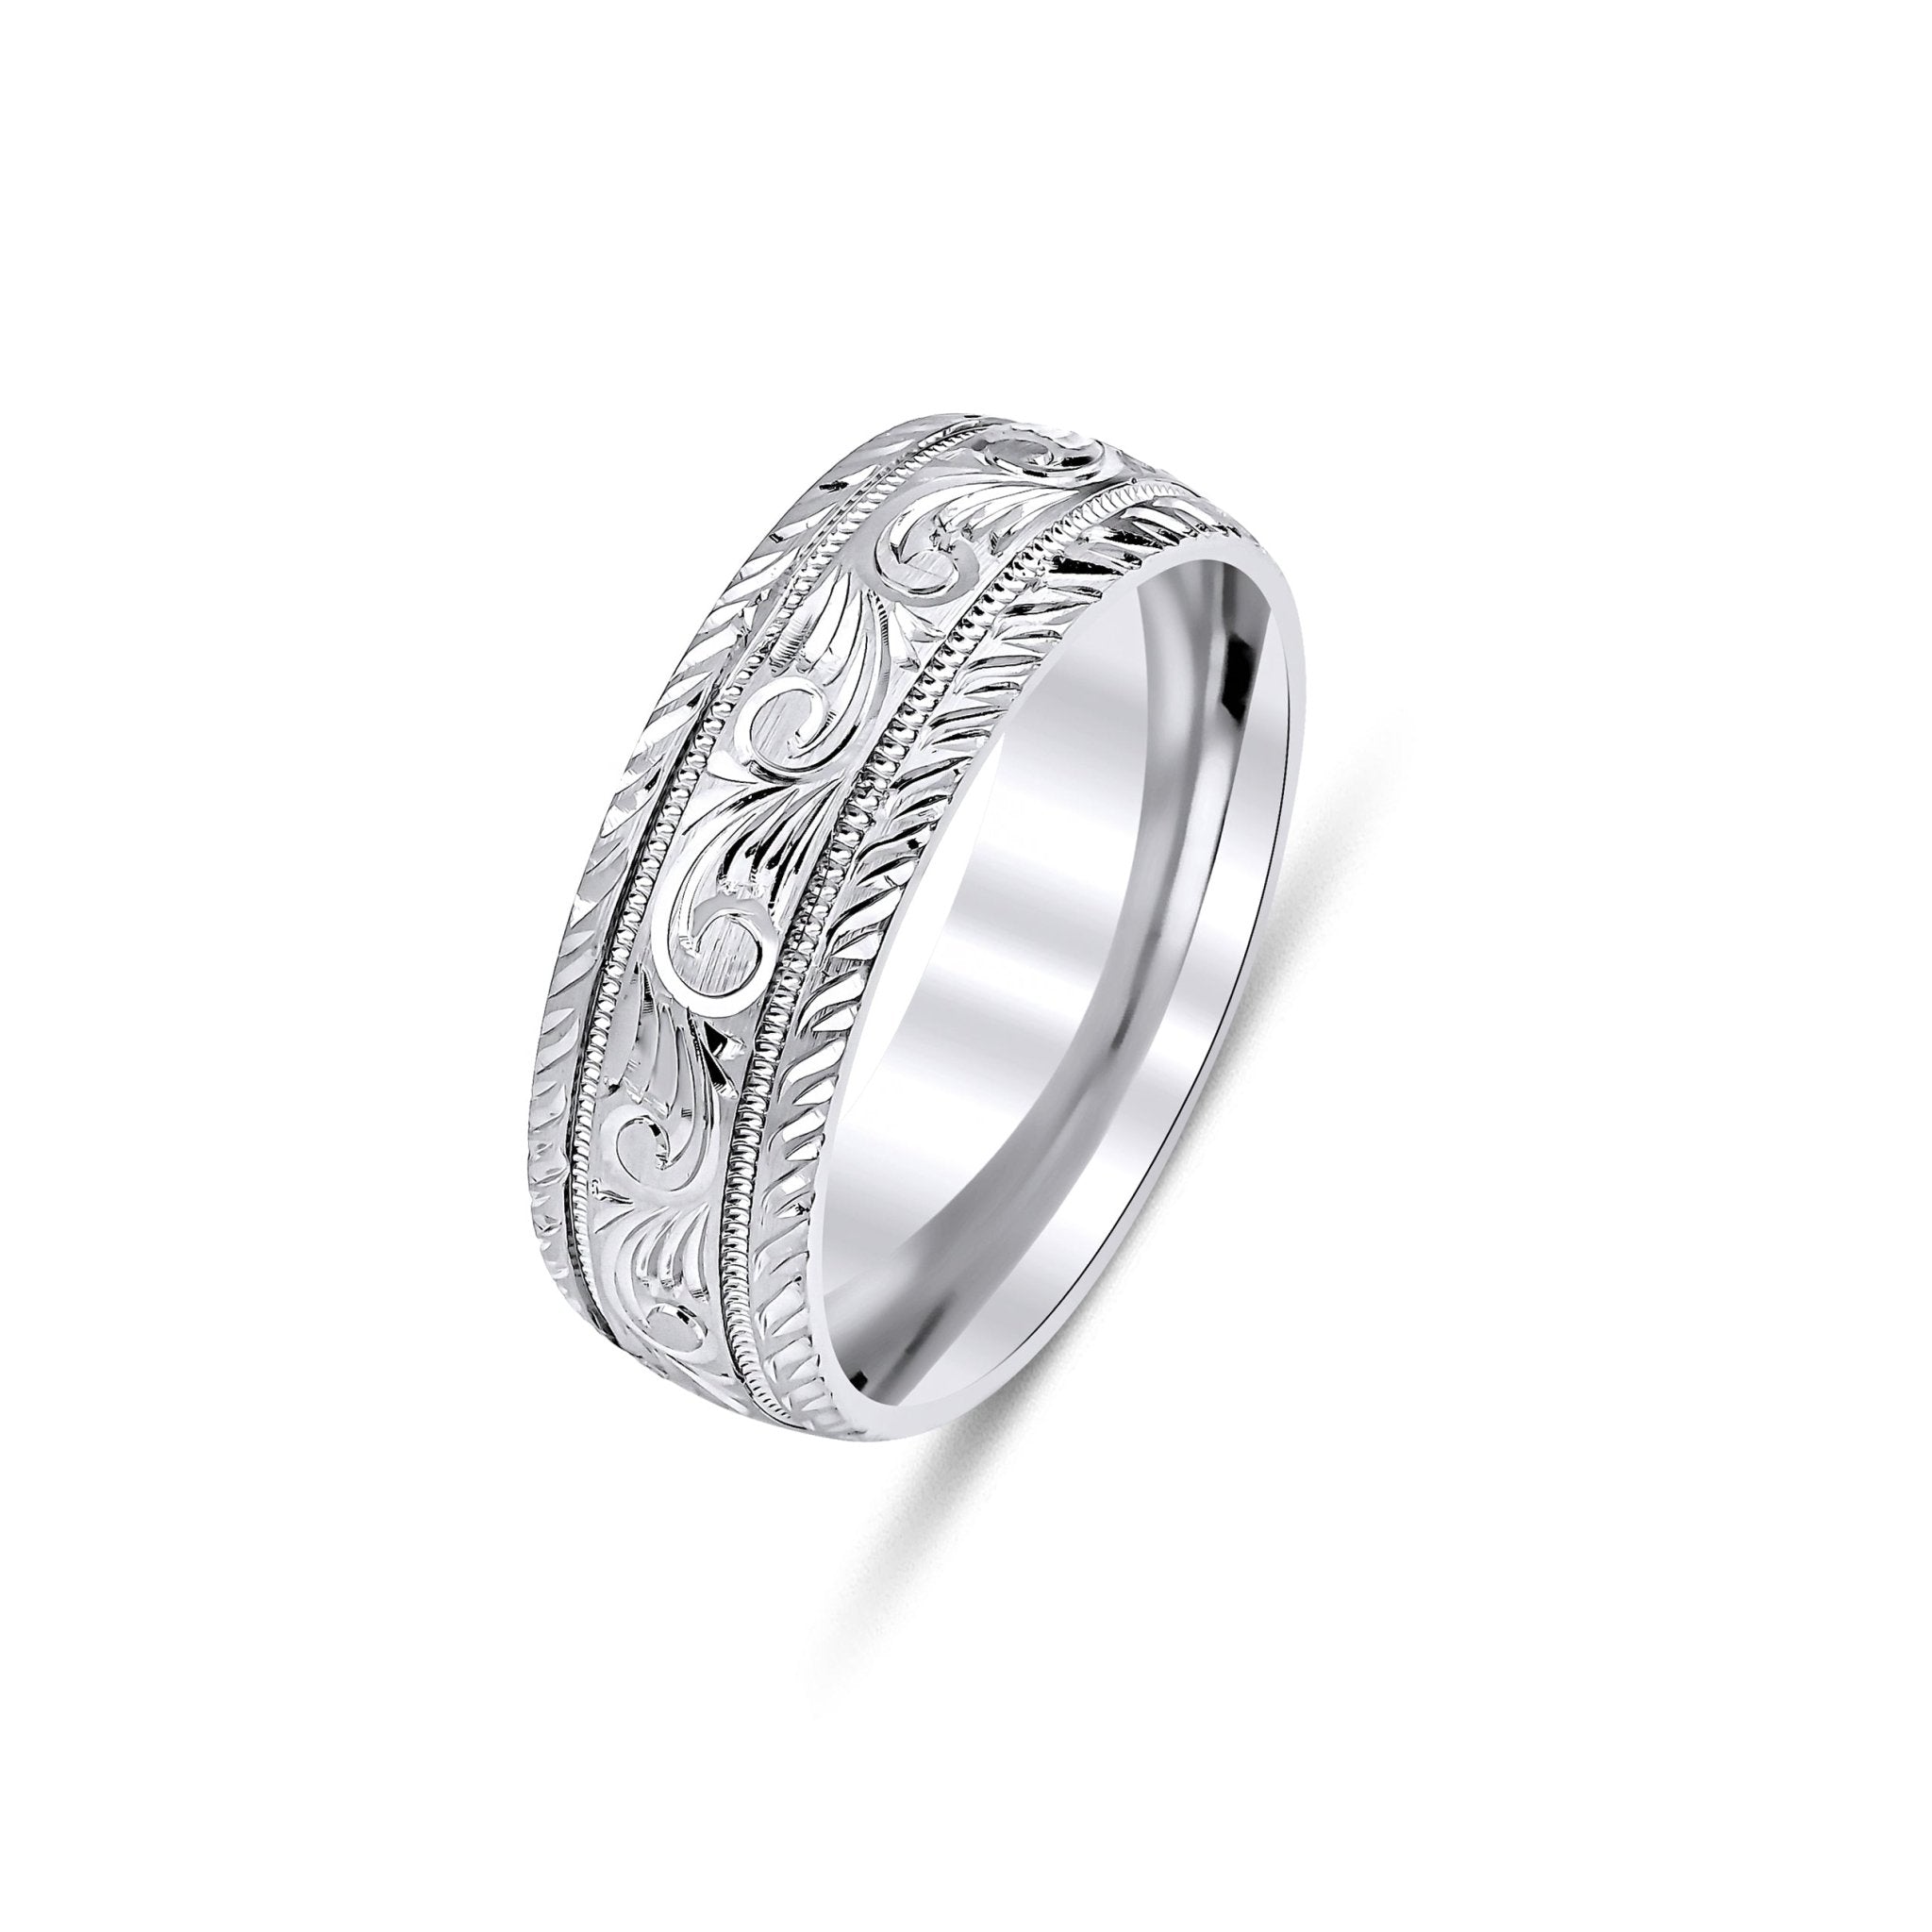 Hand Engraved Wedding Bands – LTB JEWELRY